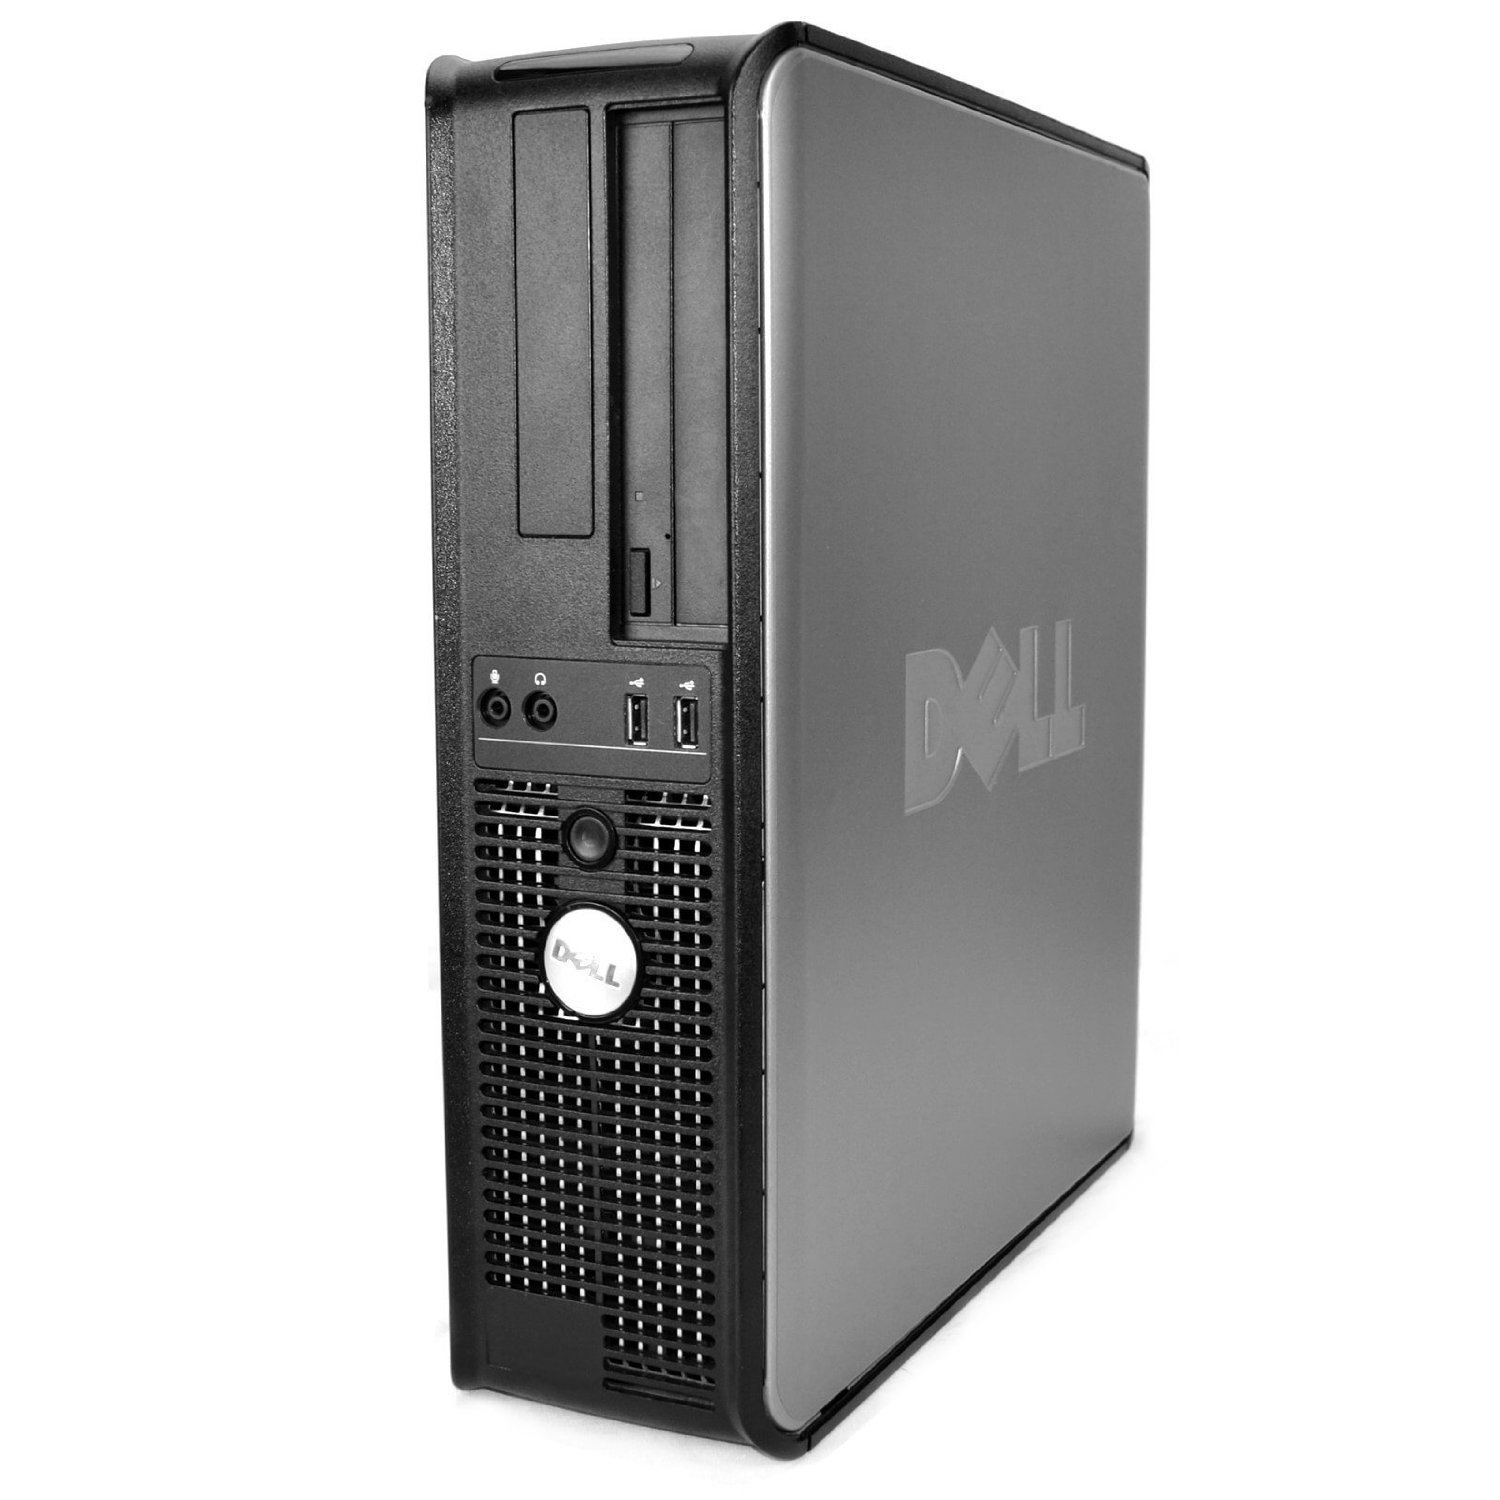 Dell OptiPlex Desktop Complete Computer Package with Windows 10 Home - Keyboard, Mouse, 17